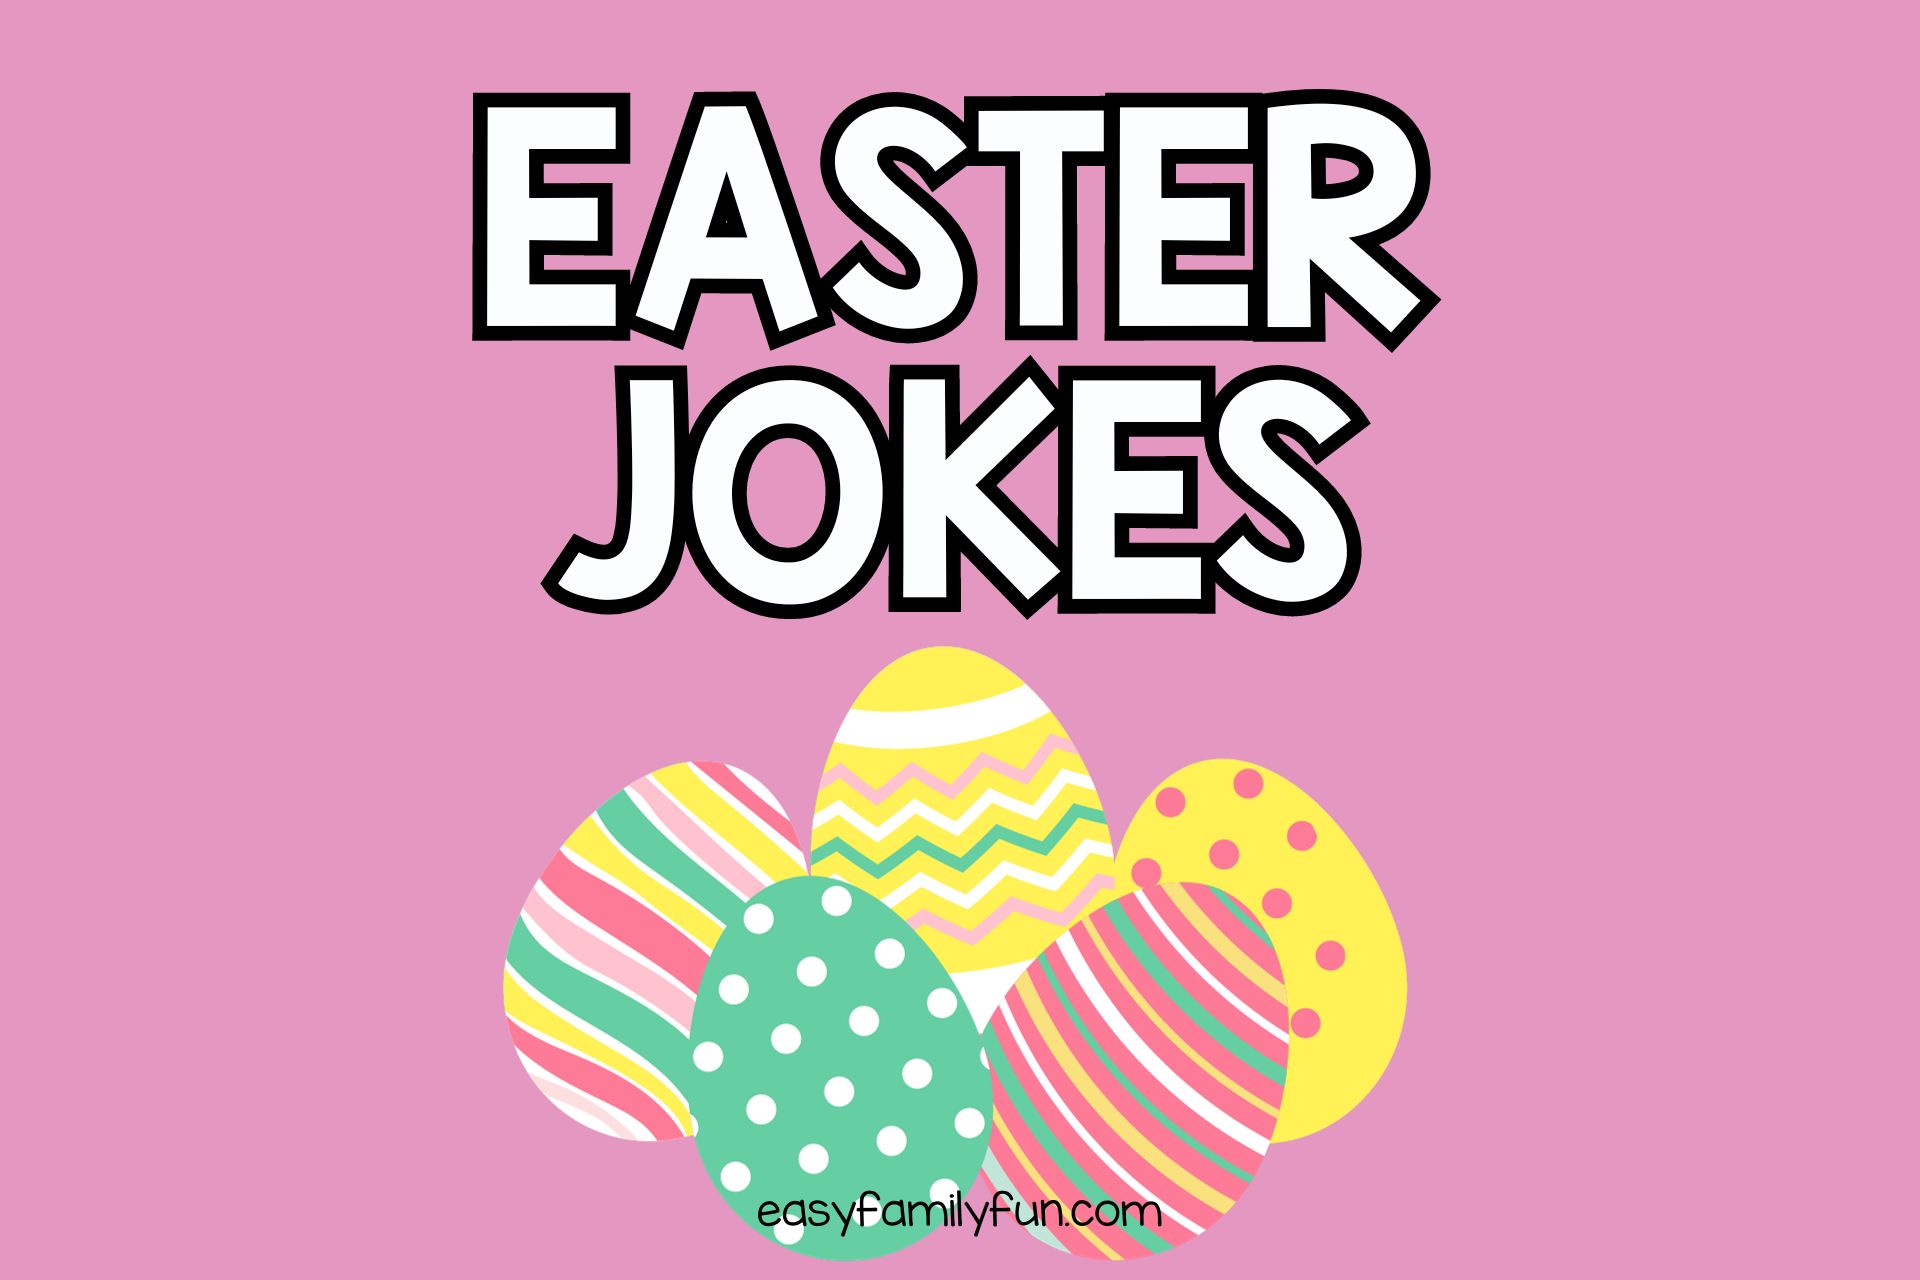 feature image in pink background, white text saying "easter jokes"